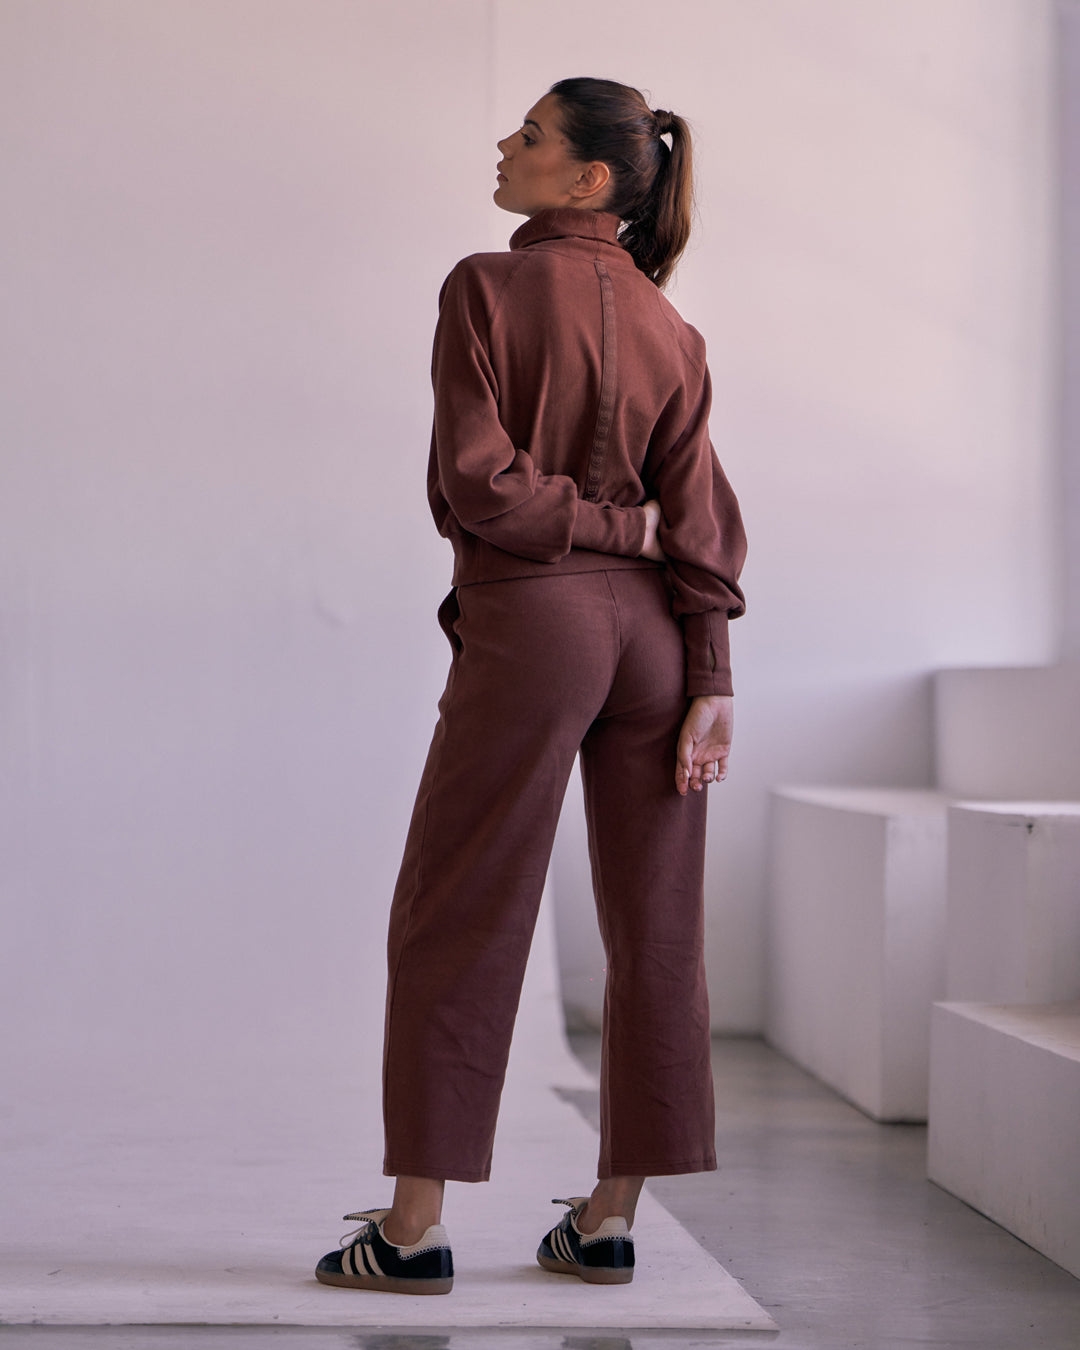 KADYLUXE® womens corduroy lounge set including a turtkleneck and wide leg pant in color brown.